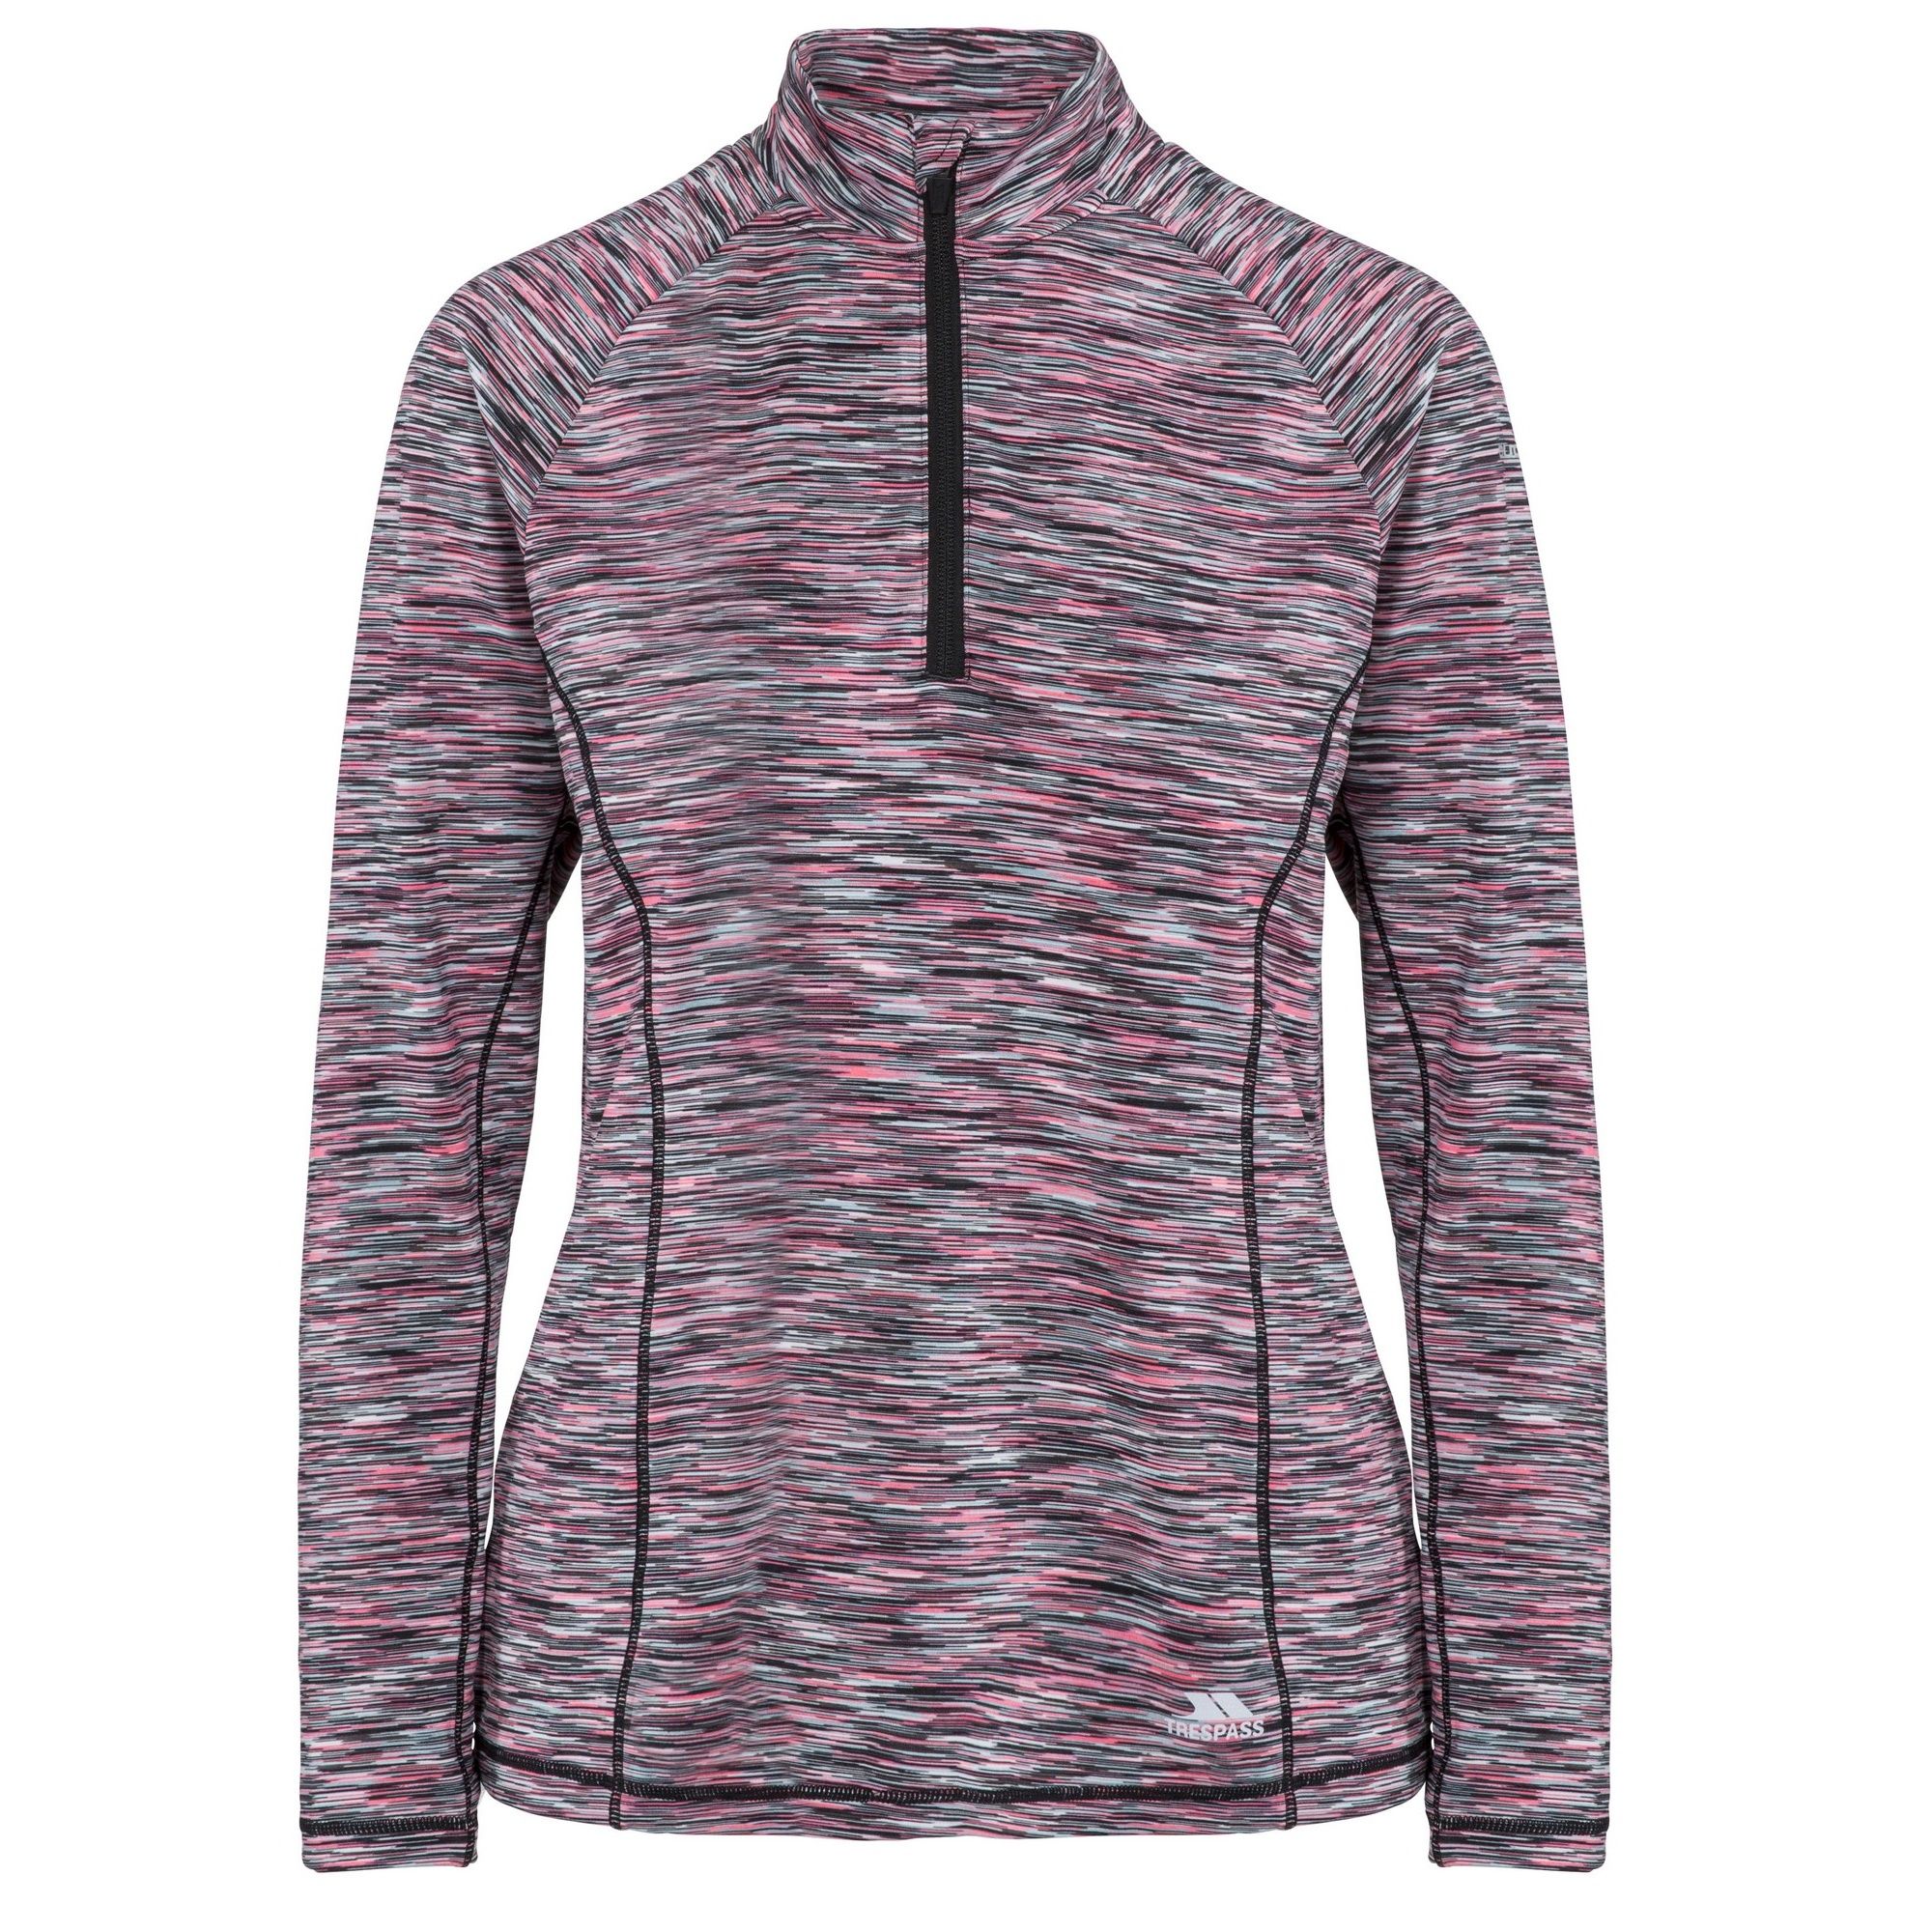 1/2 zip neck. Long sleeve. Small rear zip pocket. Contrast inner back neck binding. Reflective printed logos. Wicking. Quick dry. 87% Polyester, 13% Elastane. Trespass Womens Chest Sizing (approx): XS/8 - 32in/81cm, S/10 - 34in/86cm, M/12 - 36in/91.4cm, L/14 - 38in/96.5cm, XL/16 - 40in/101.5cm, XXL/18 - 42in/106.5cm.